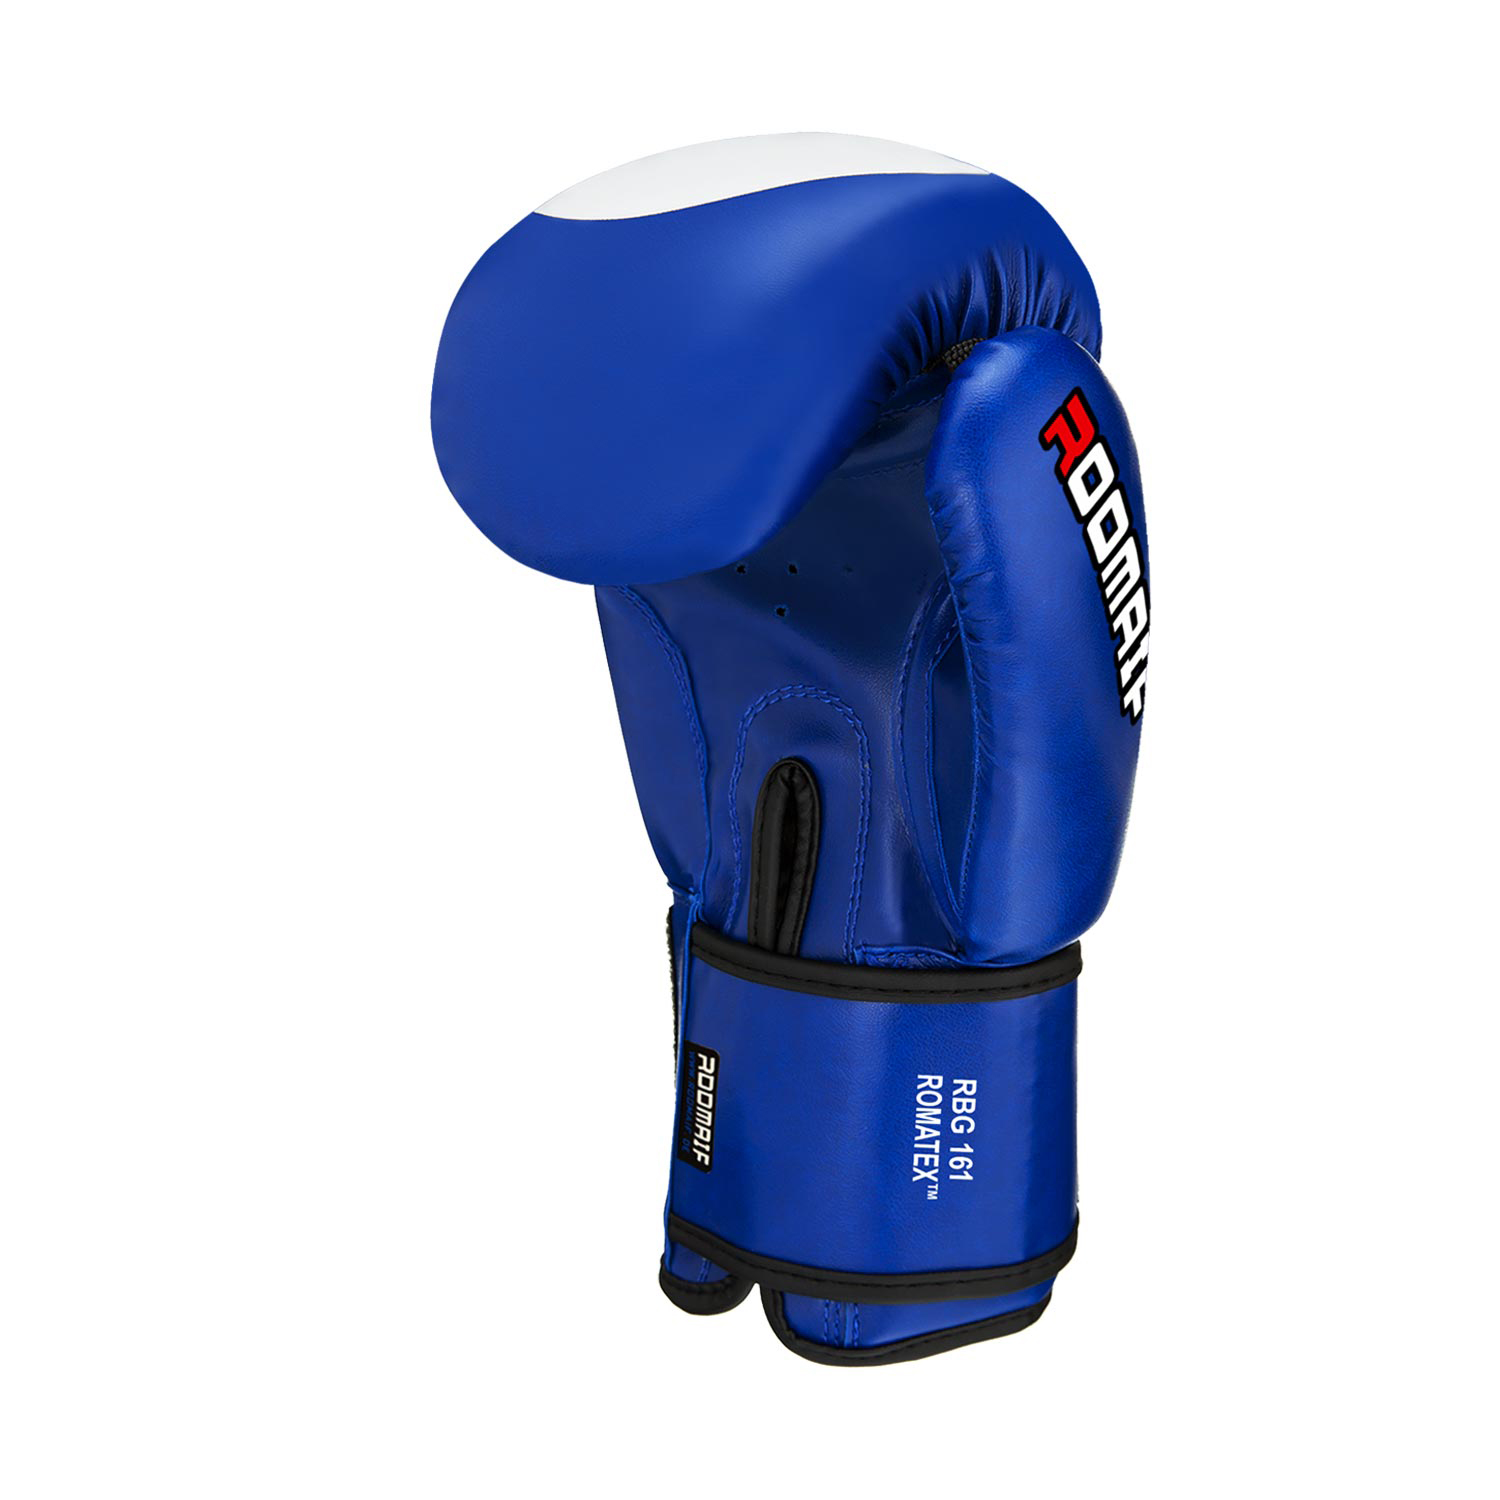 Roomaif combative boxing gloves in blue color